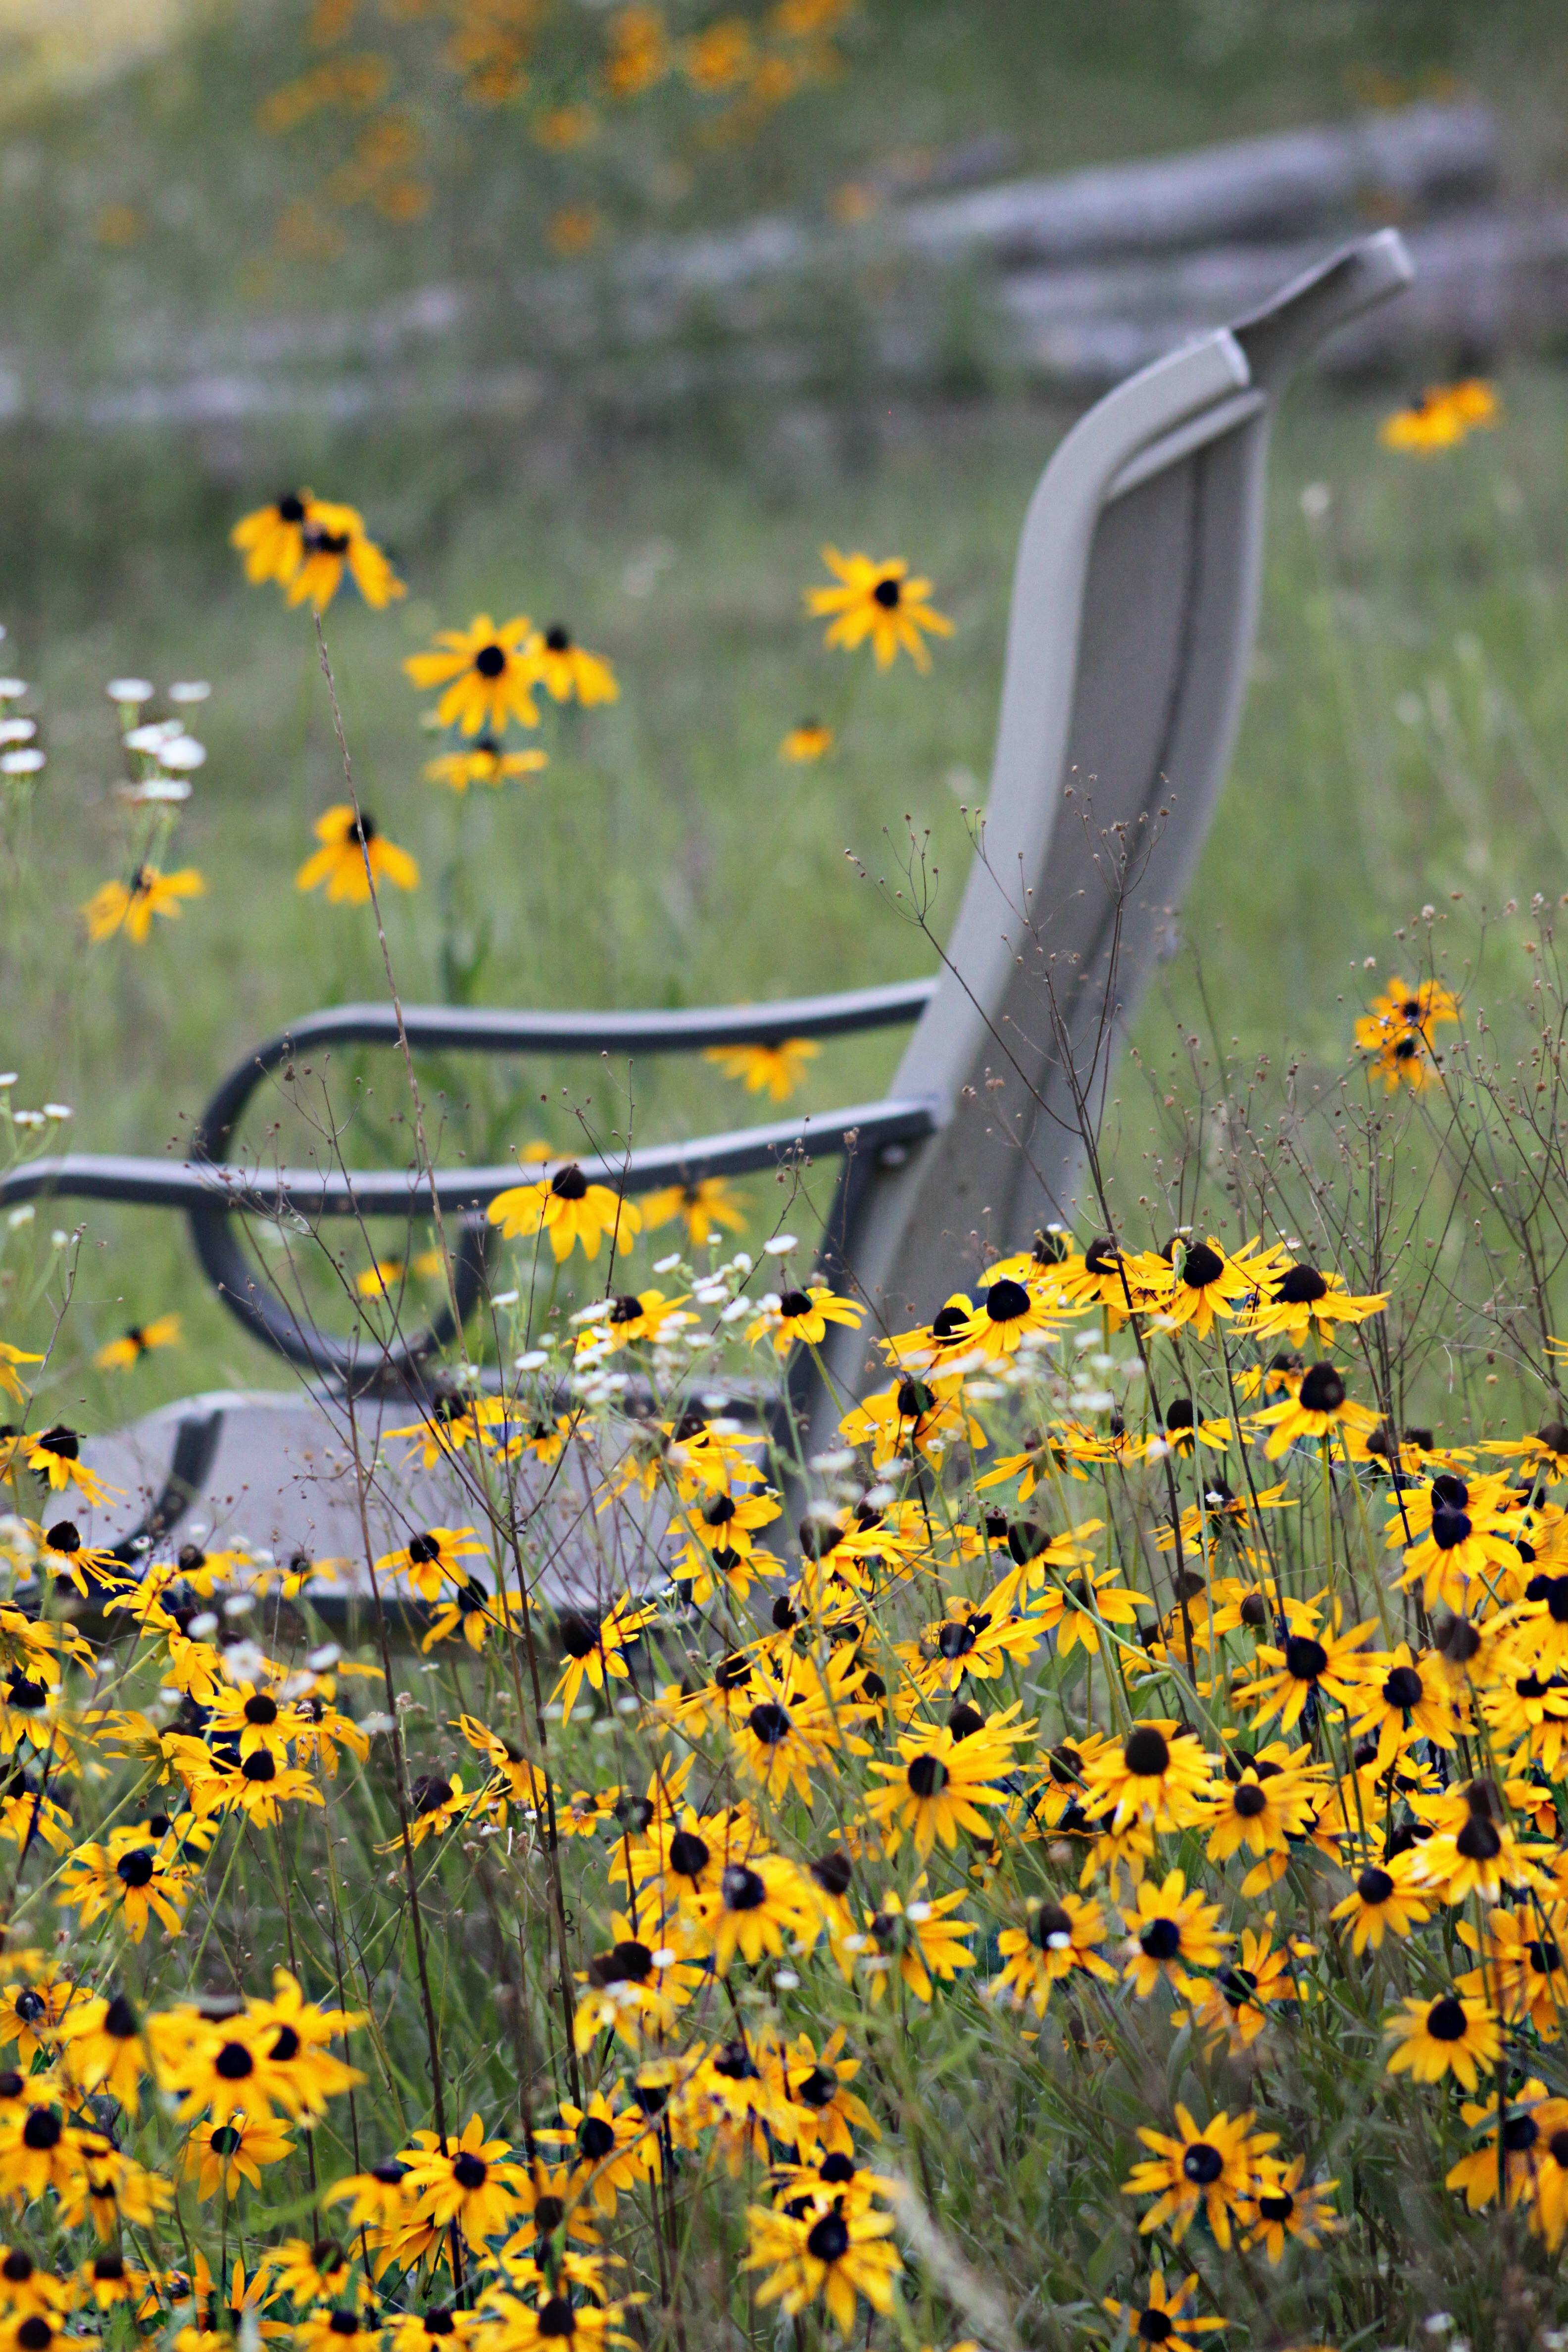 Connection, thankful Thursday, Flowers, wild flowers, Black-eyed Susan, field of wild flowers, contemplation, thankfulness, thank you, Gods gift, are we thankful, child like, 